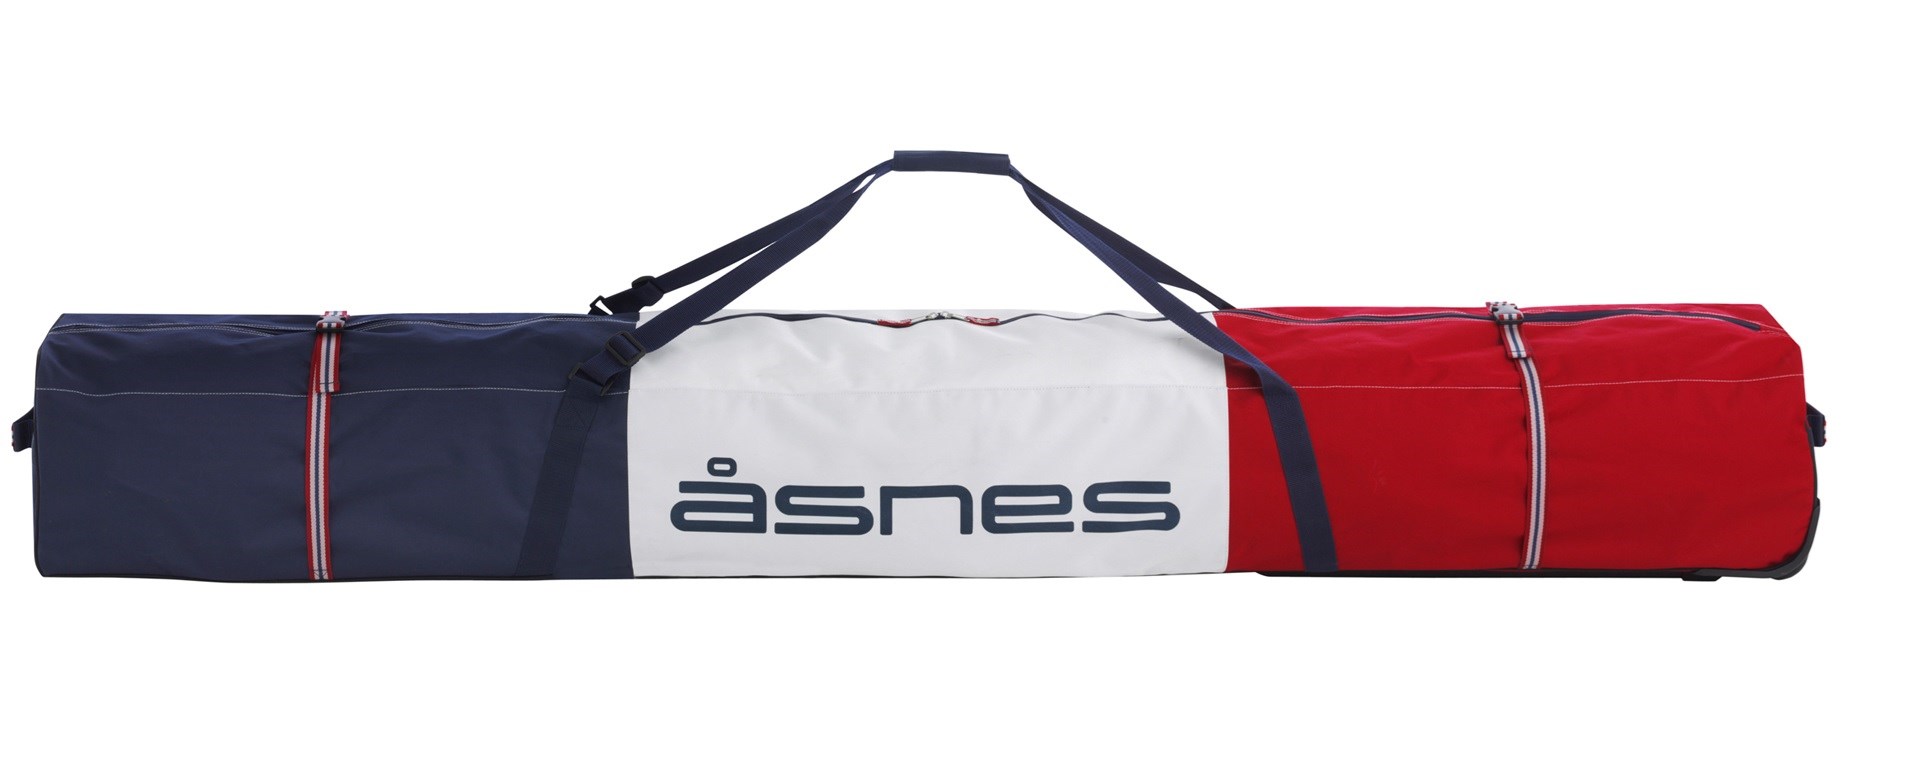 Åsnes Skidbag Double with wheels 2 pairs